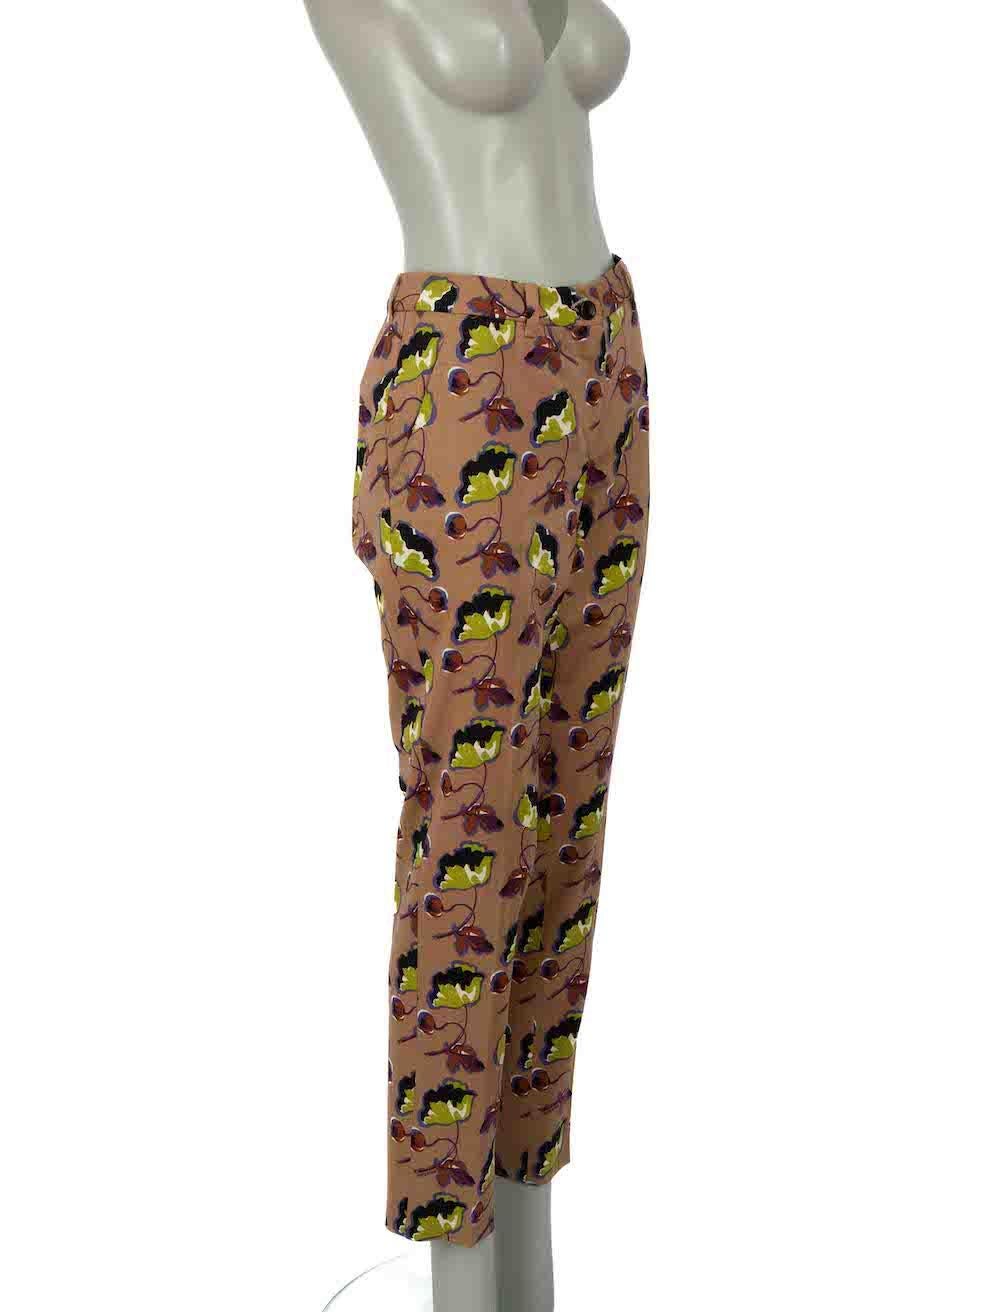 CONDITION is Never worn. No visible wear to trousers is evident on this new Miu Miu designer resale item.
 
Details
Brown
Wool
Trousers
Floral pattern
Slim fit
2x Side pockets
2x Back pockets
Fly zip and button fastening
Back buckle detail
 
Made in